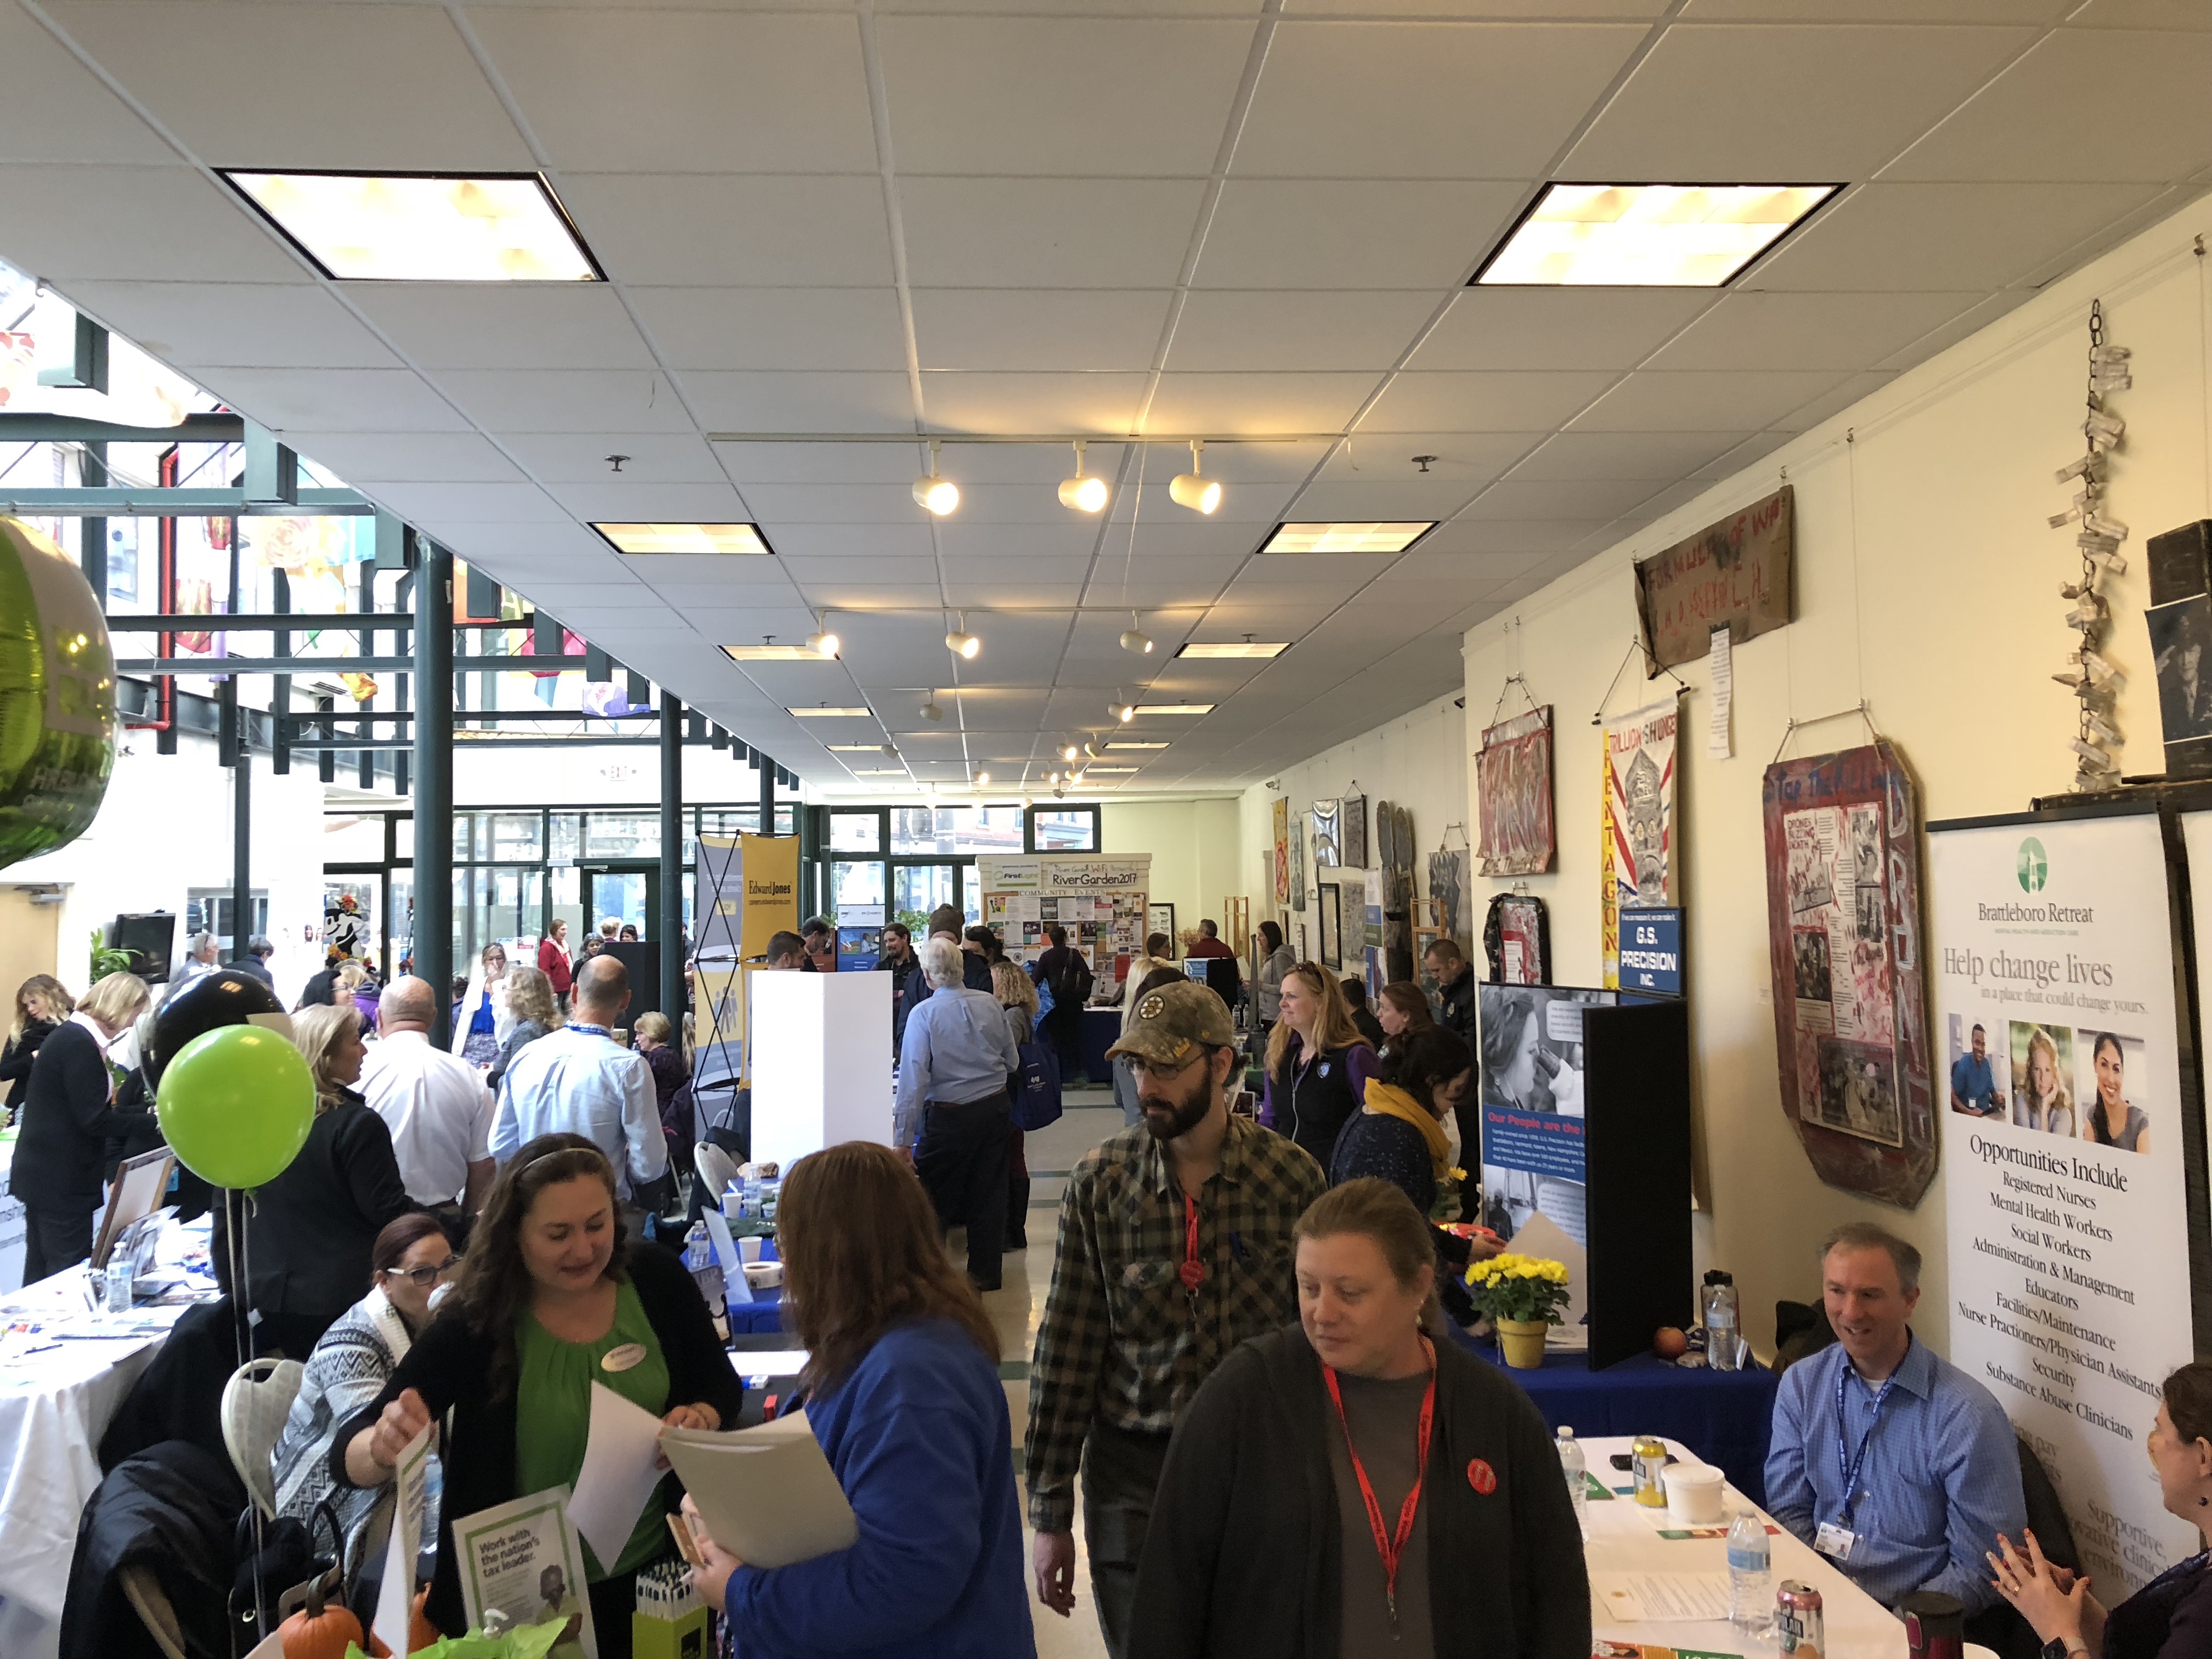 Nearly 300 Attendees And 45 Job-seekers Attended The Expo.